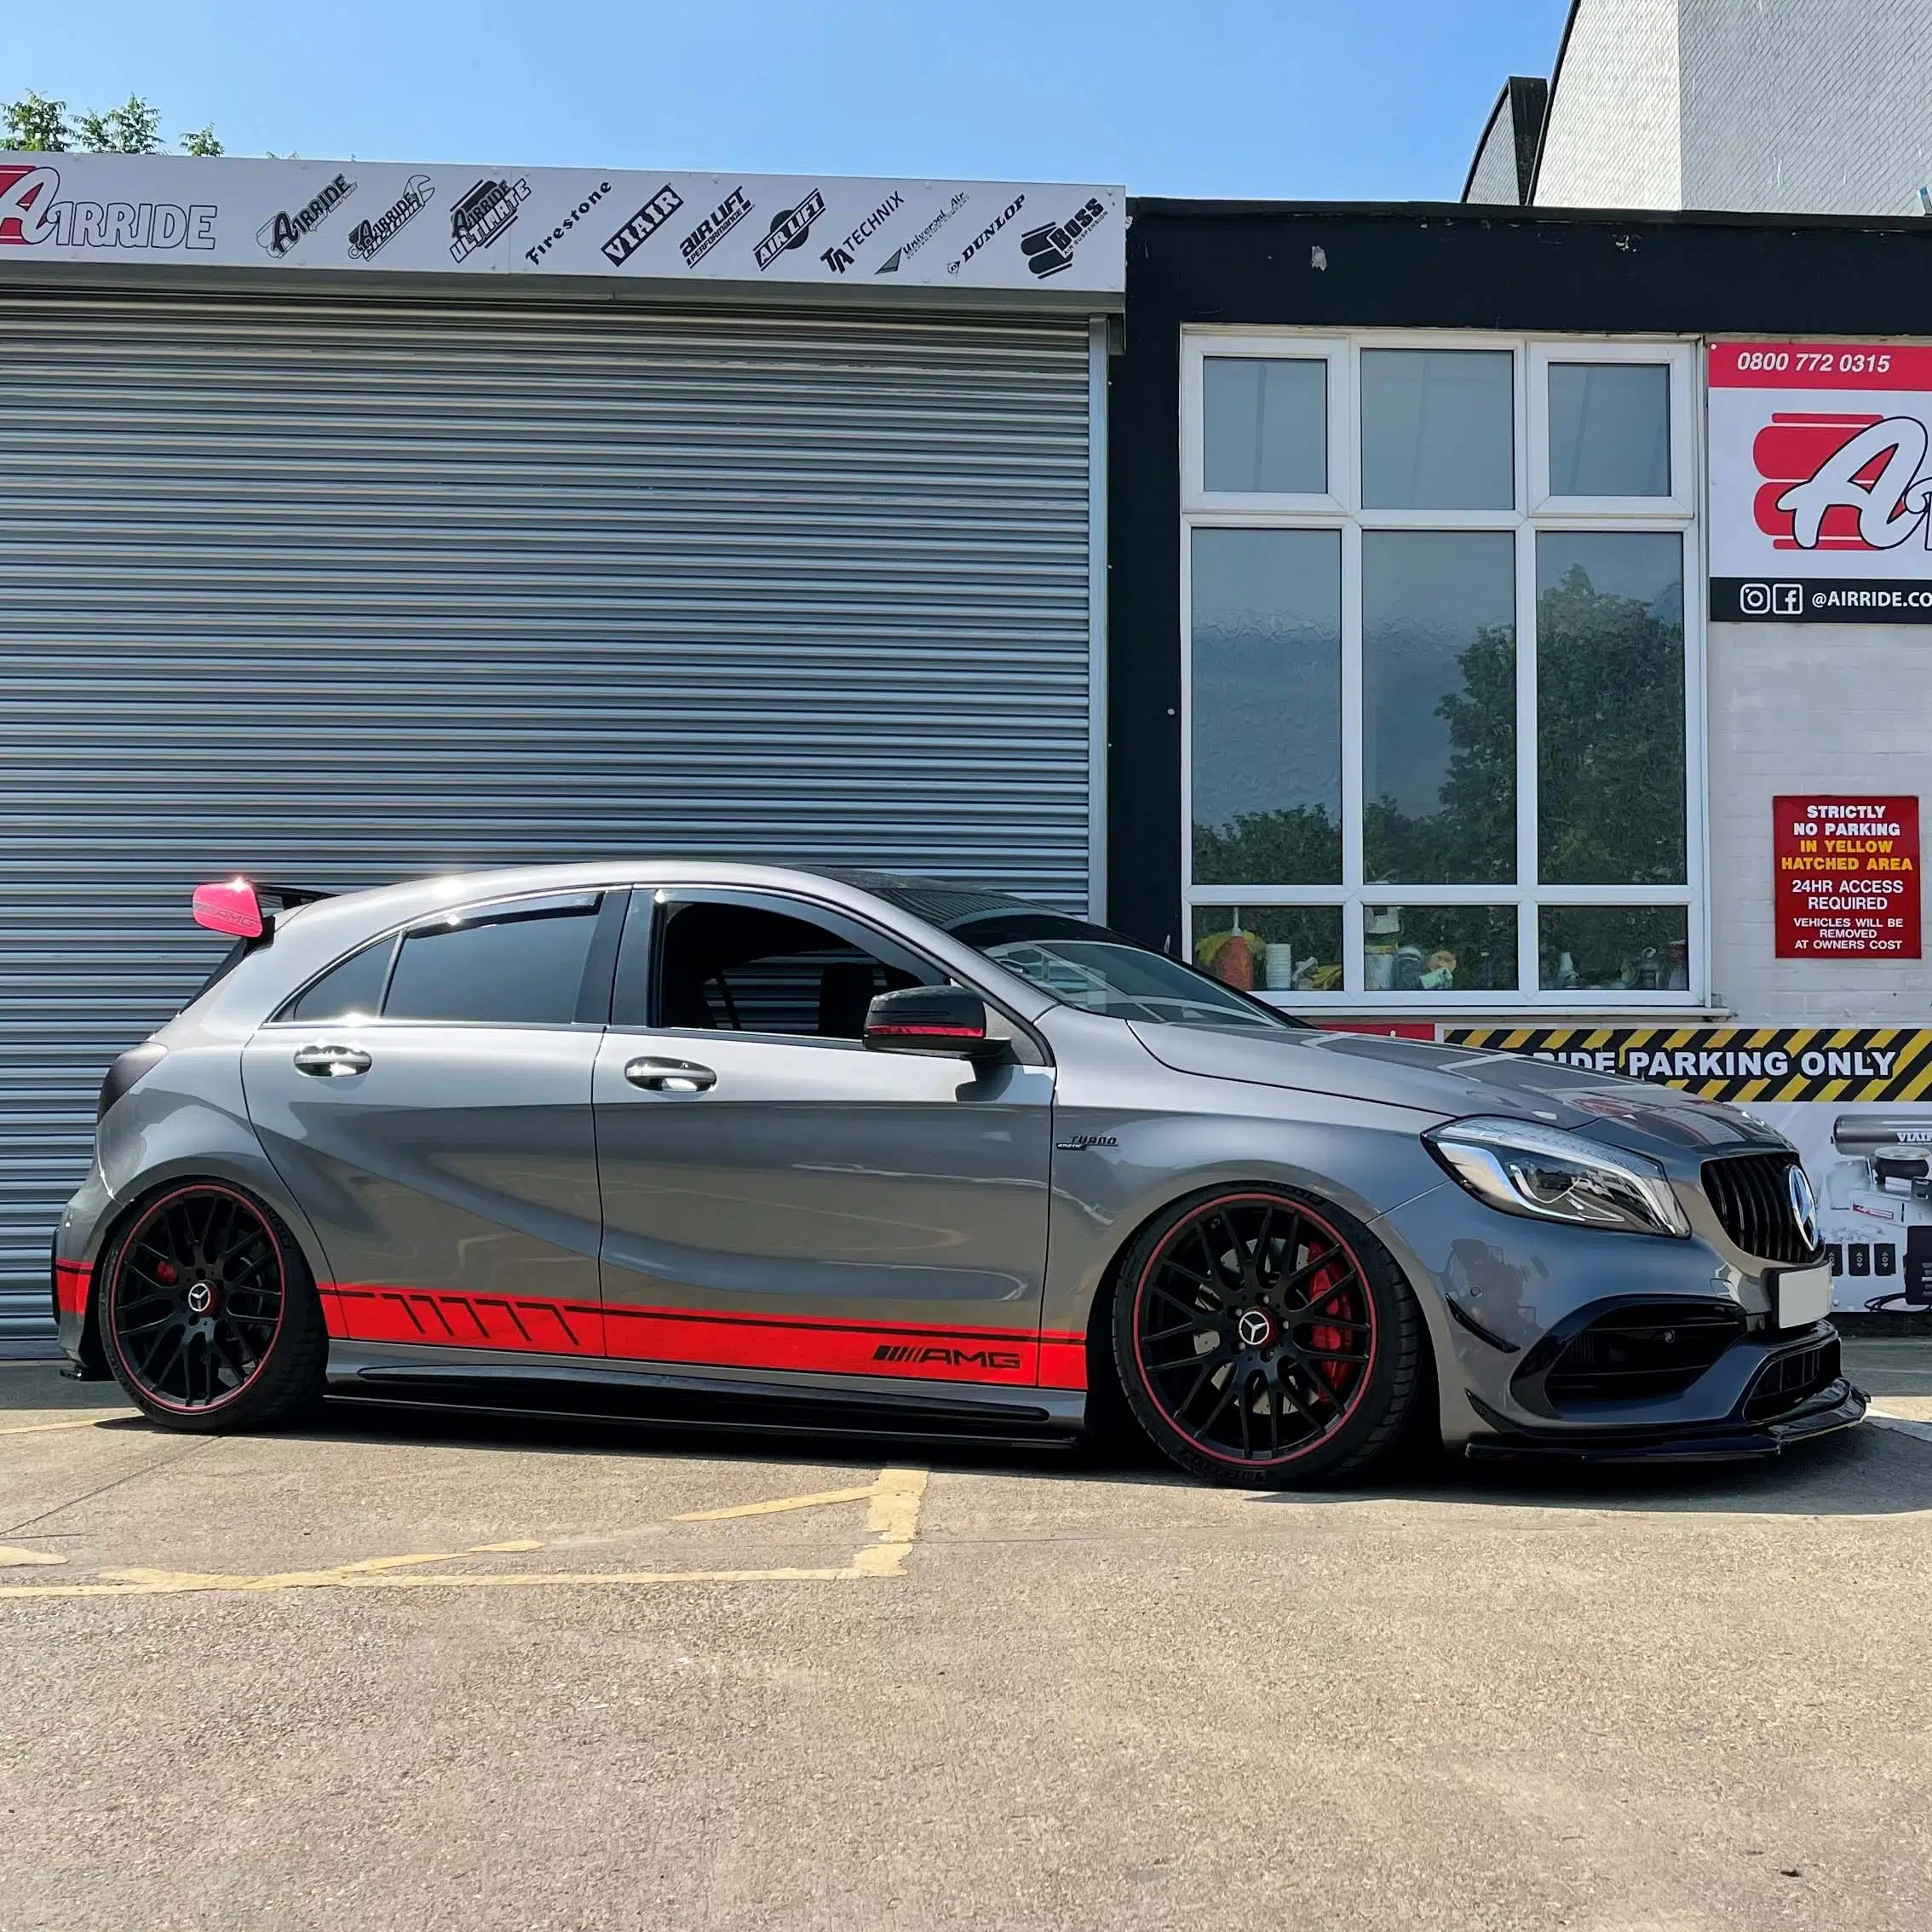 A mercedes benz w176 with lowered suspesion and a widebody kit on Craiyon